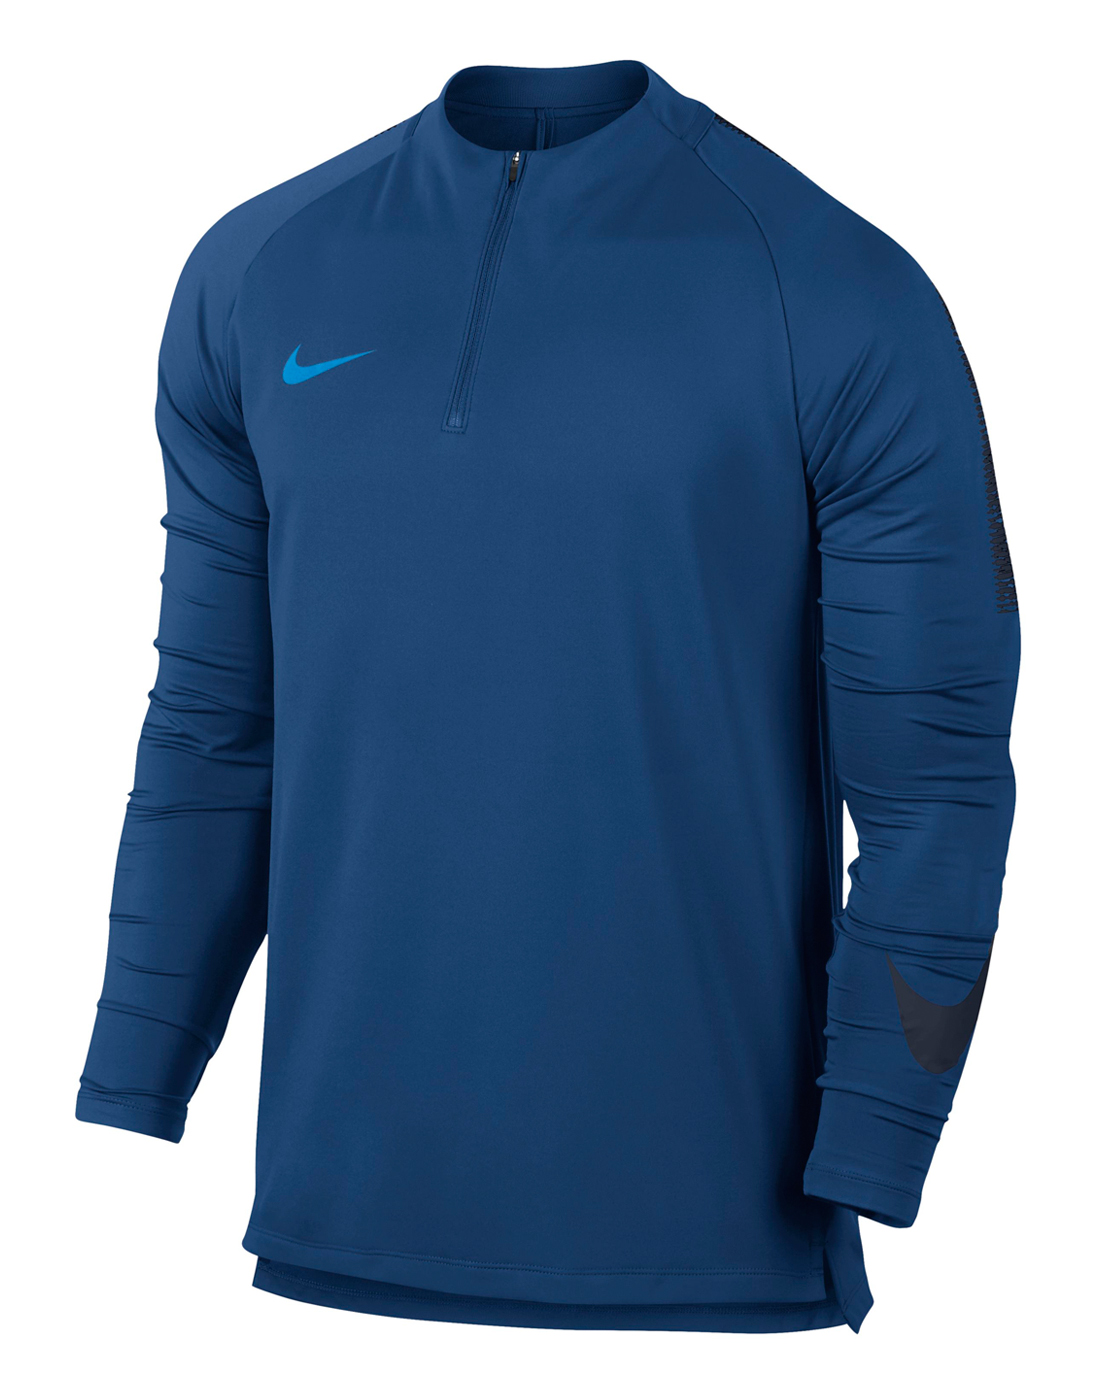 Nike Mens Dry Squad Dril Top - Navy | Life Style Sports UK